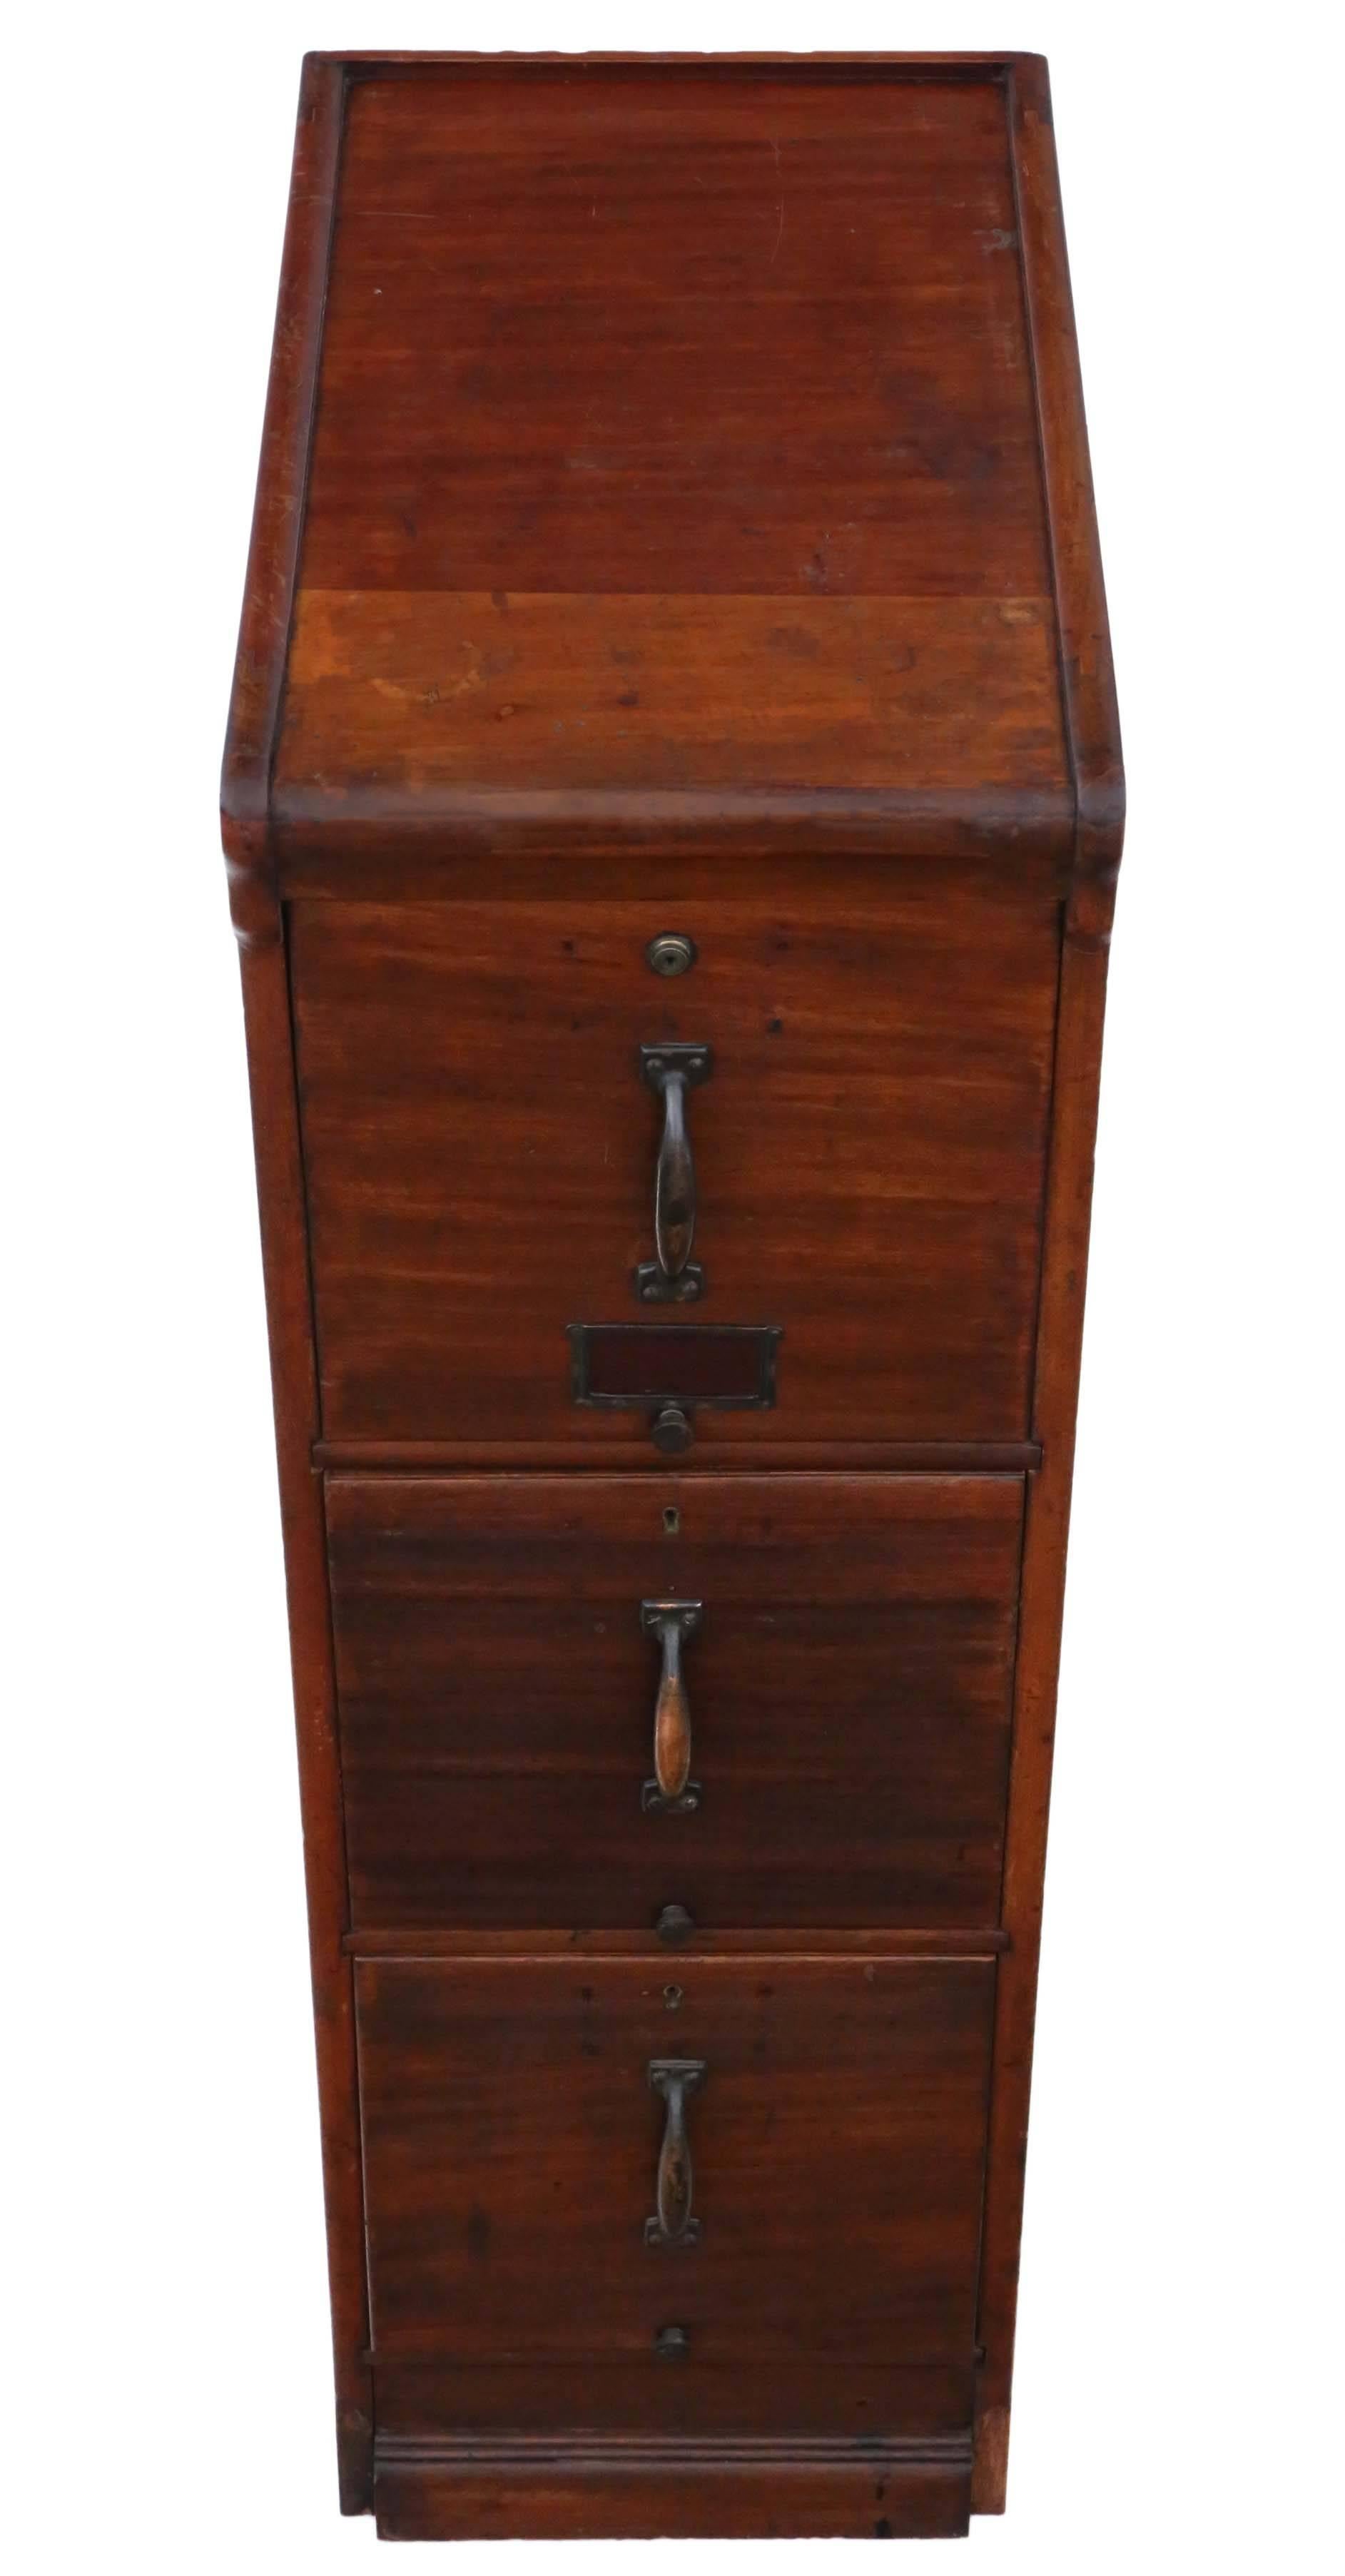 Antique mahogany Globe Wernicke mahogany filing cabinet, circa 1920.

This is a lovely rare quality piece, that is full of age, charm and character.

Solid with no loose joints and no woodworm.

All of the oak lined drawers slide